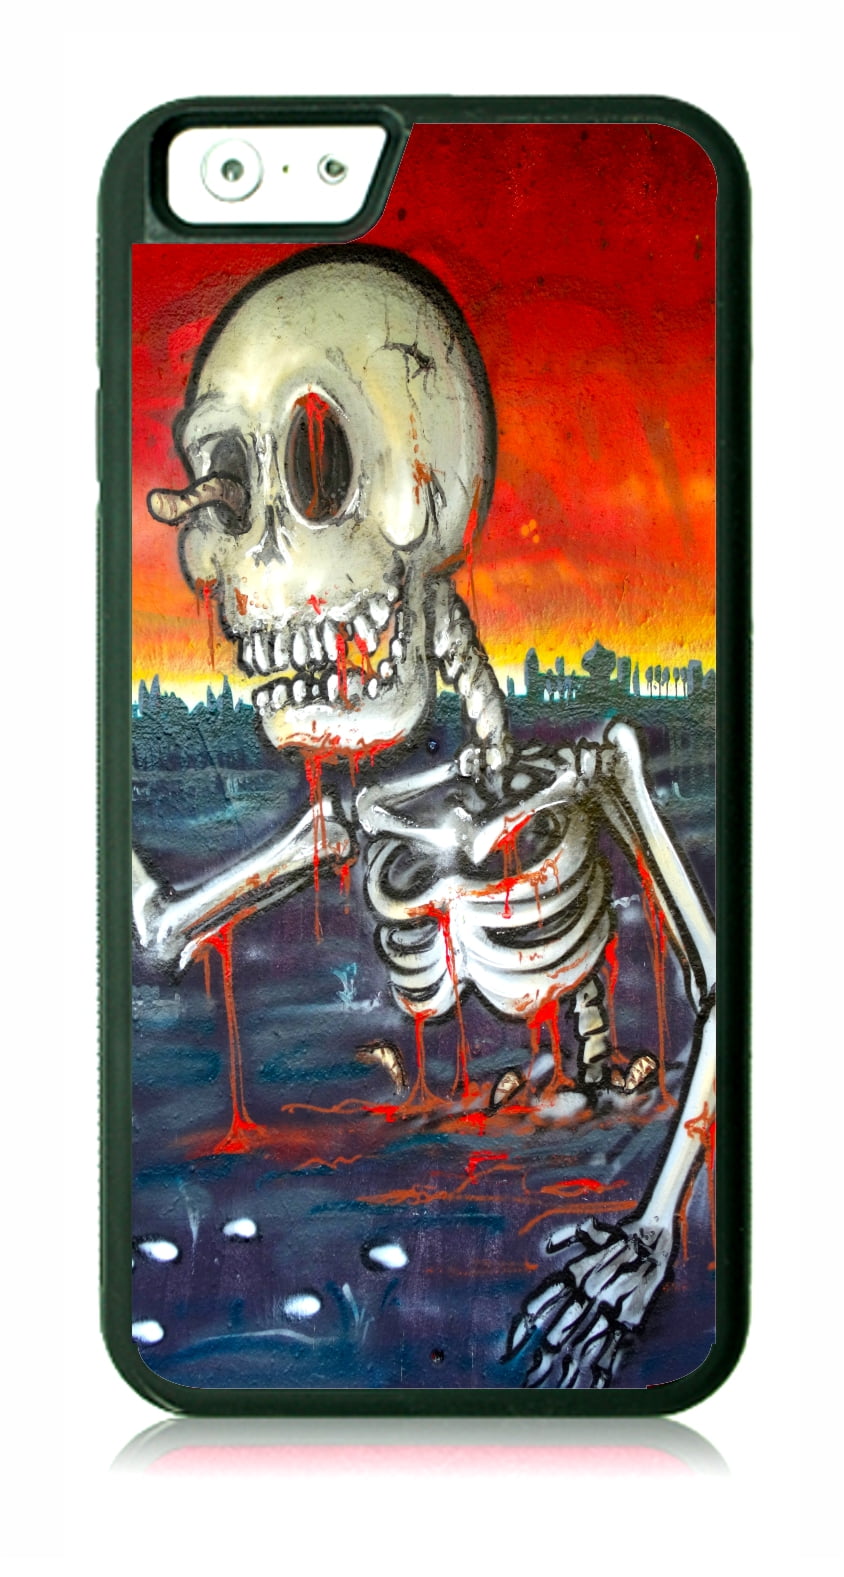 Graffiti Style Watercolor Zombie Skeleton Black Rubber Case for the Apple iPhone 6 / iPhone 6s - iPhone 6 Accessories - iPhone 6s Accessories